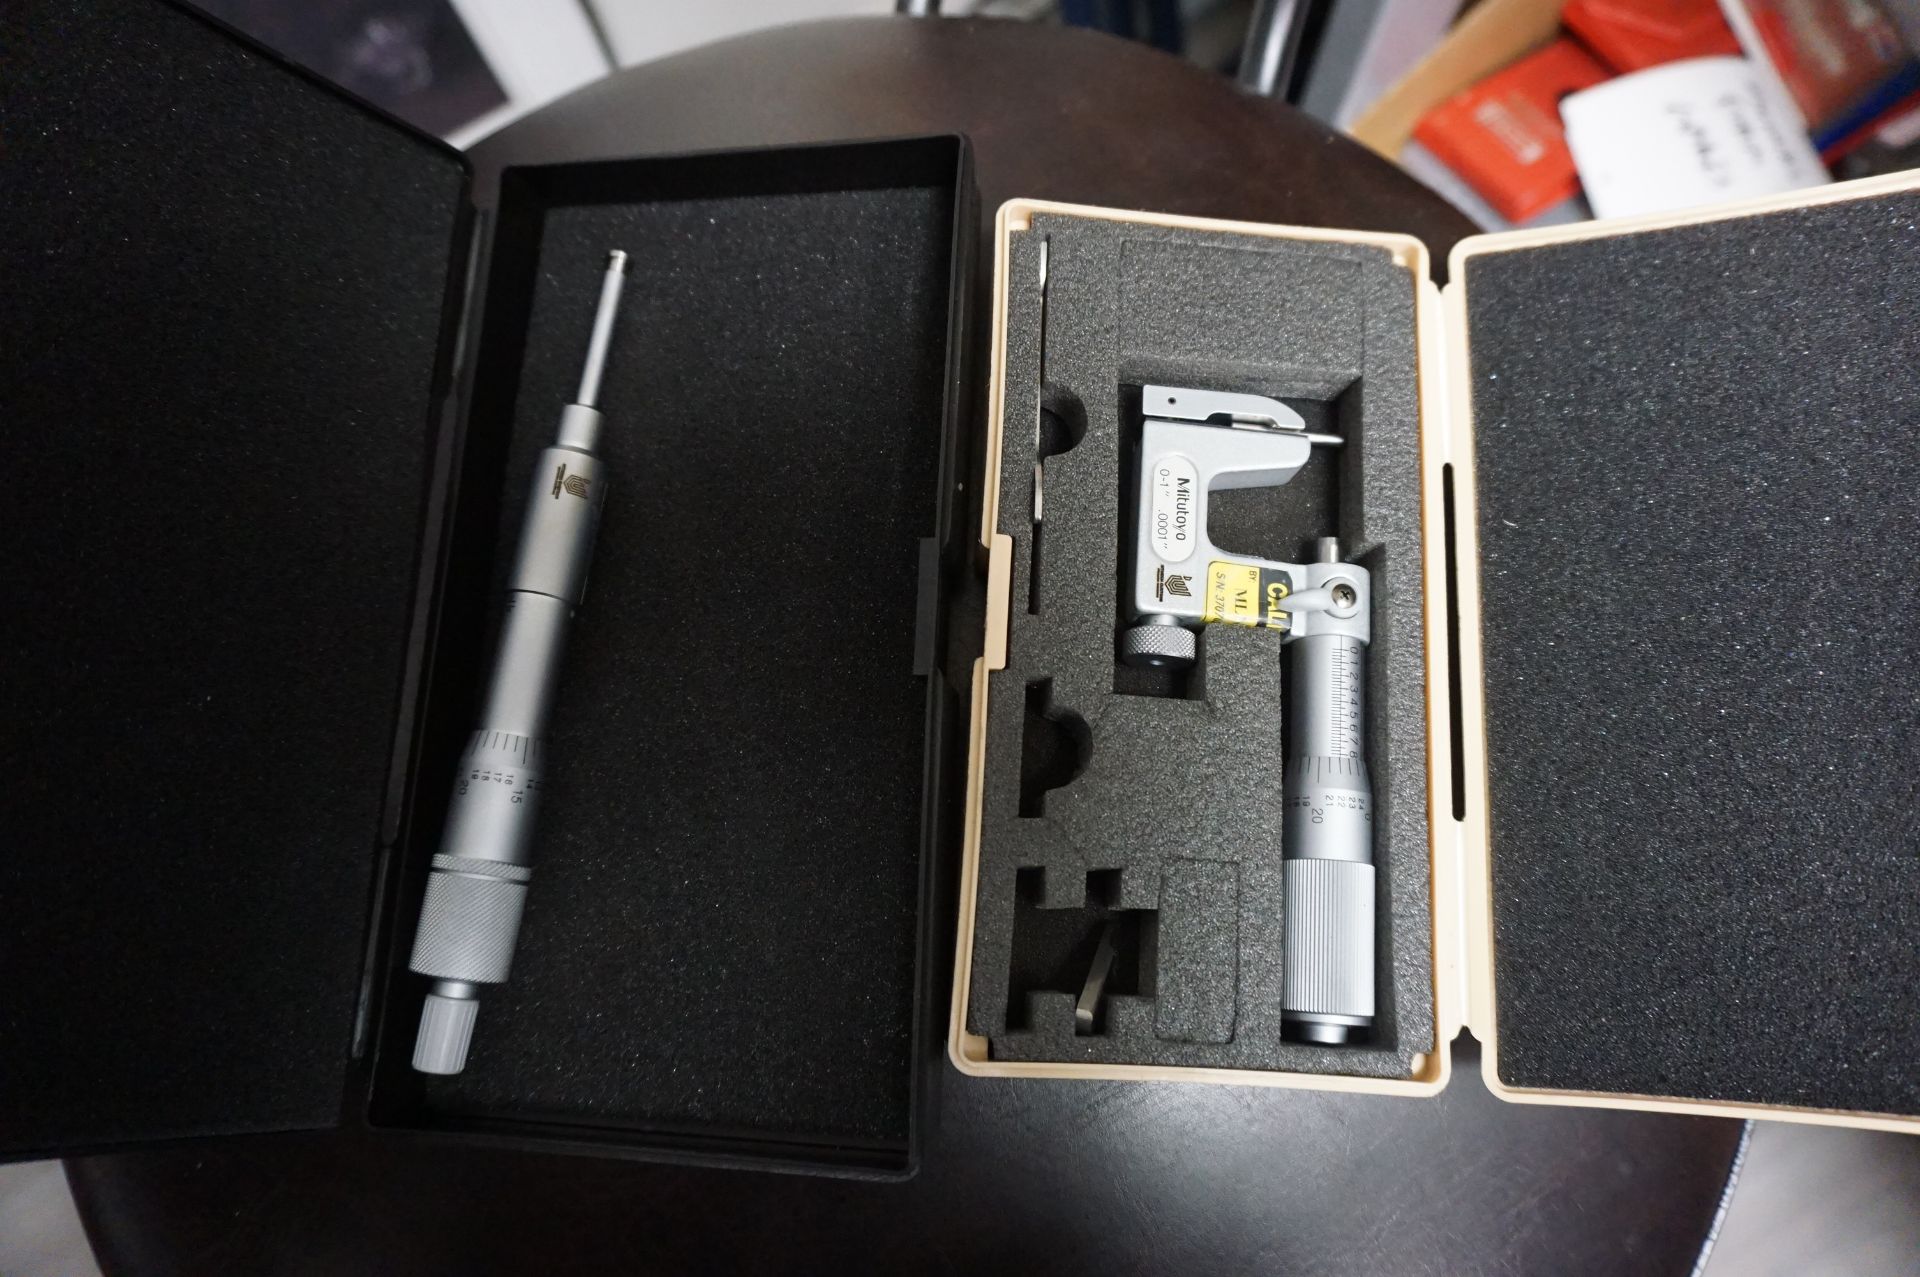 LOT TO INCLUDE: (1) MITUTOYO ANVIL MICROMETER 0-1", (1) MITUTOYO GROOVE MICROMETER 0-1"